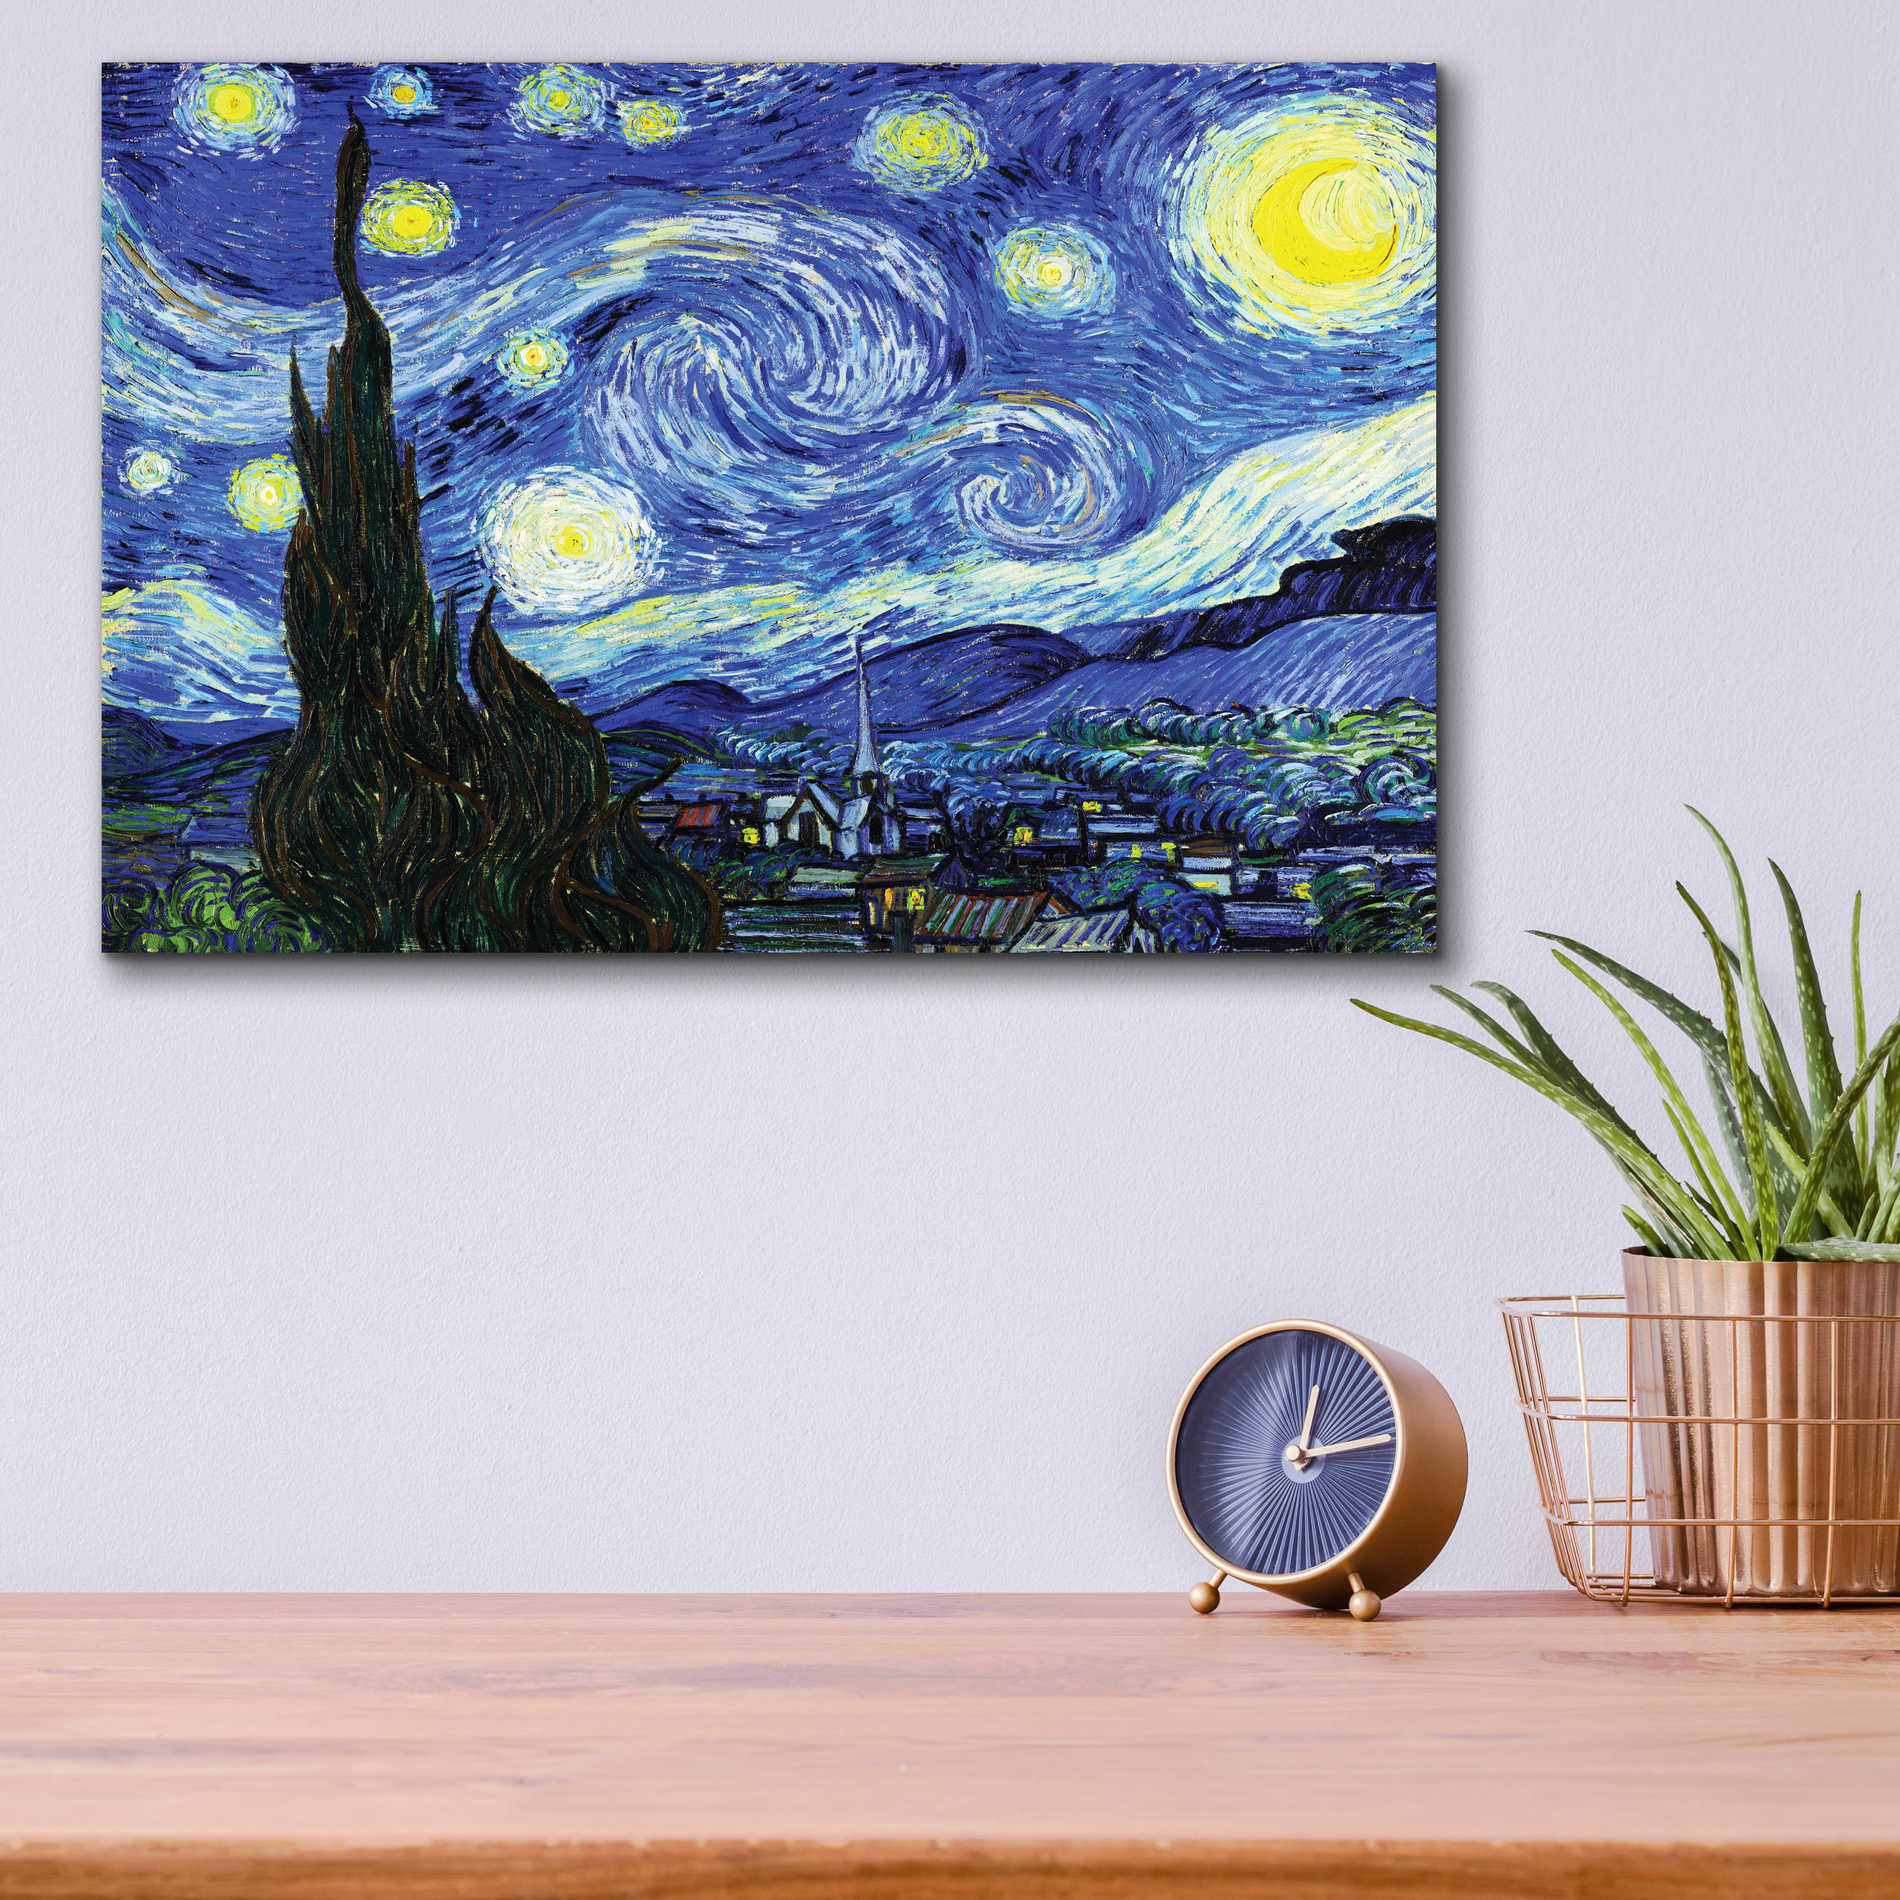 Epic Art 'The Starry Night' by Vincent van Gogh, Acrylic Glass Wall Art,16x12